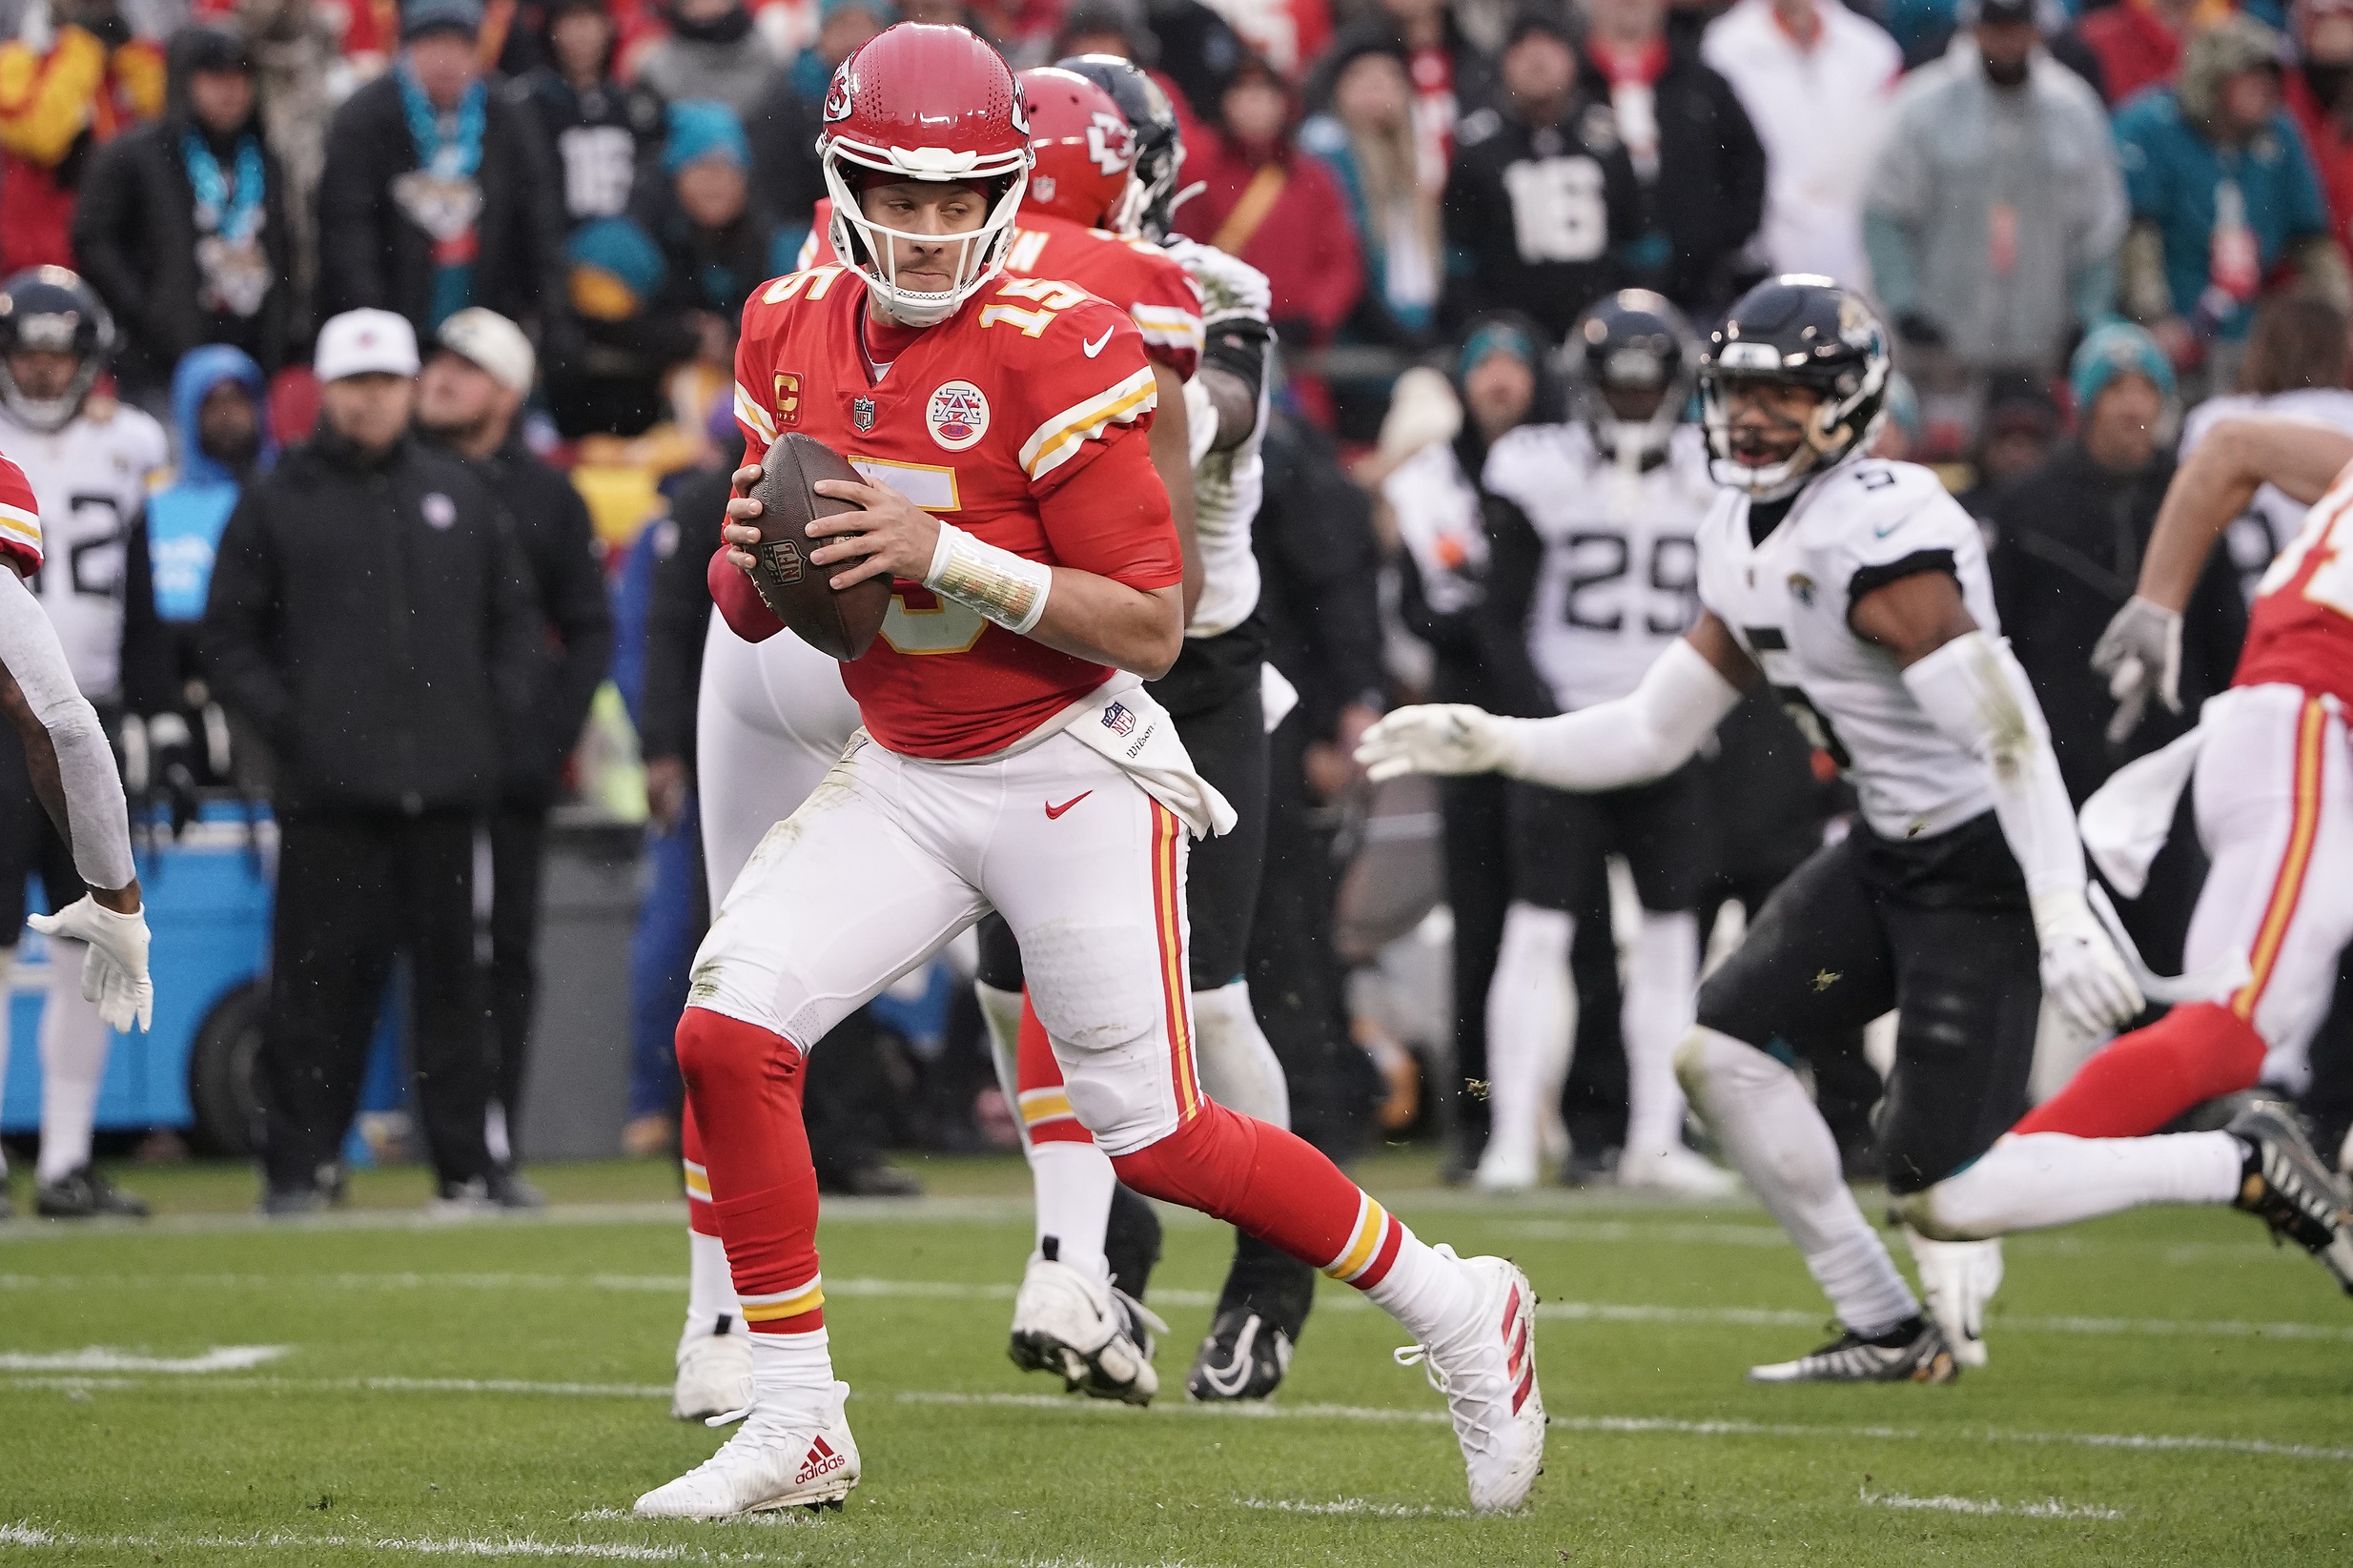 NFL betting predictions Championship Weekend opening line report and picks Patrick Mahomes